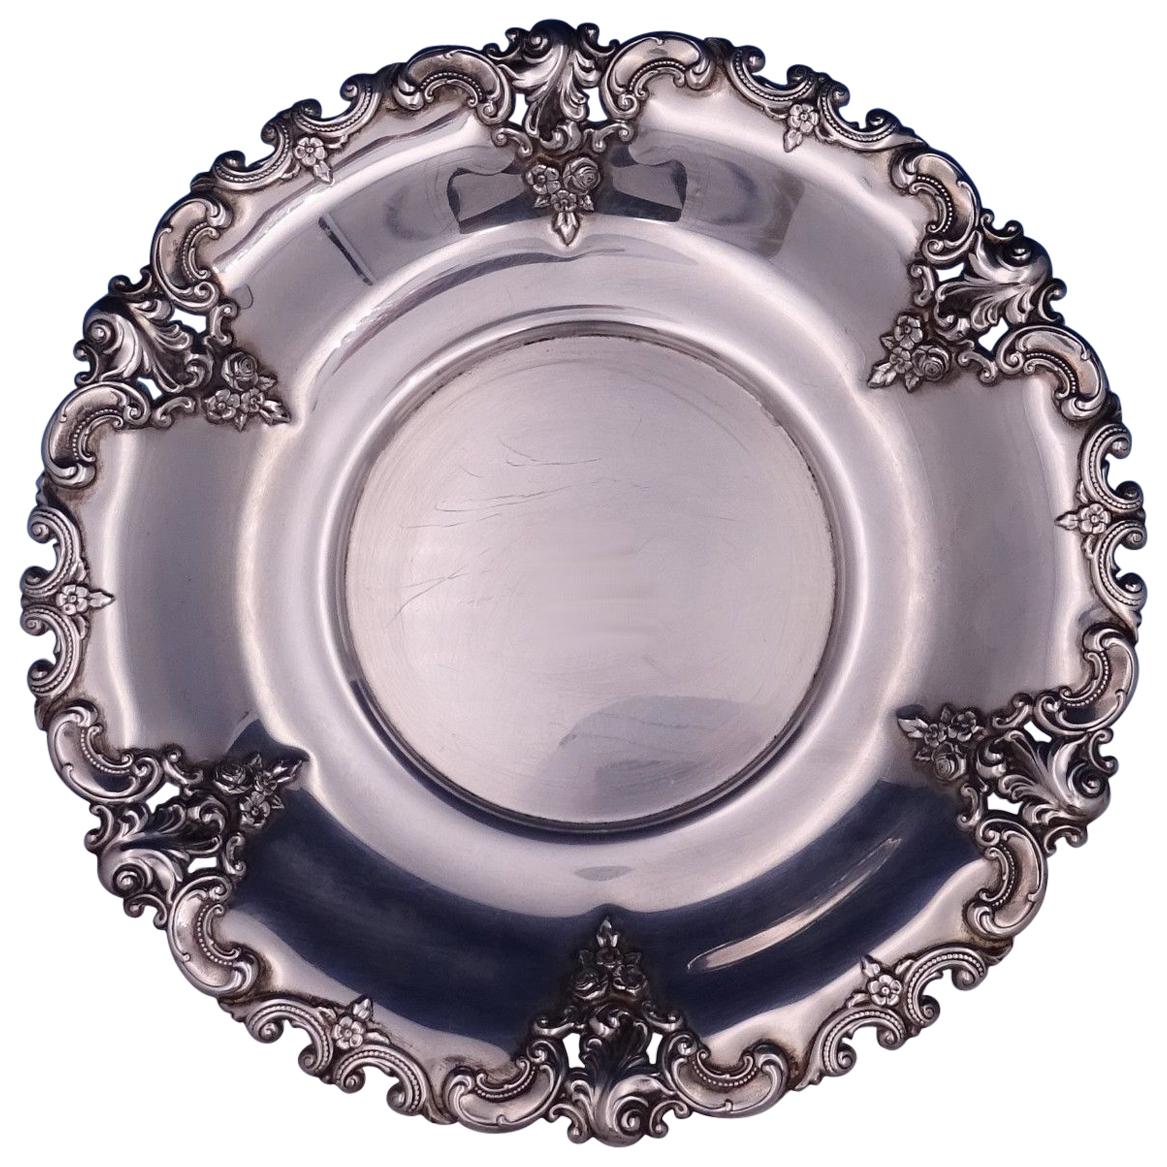 Grande Baroque by Wallace Sterling Silver Bowl Underplate #5971 Vintage